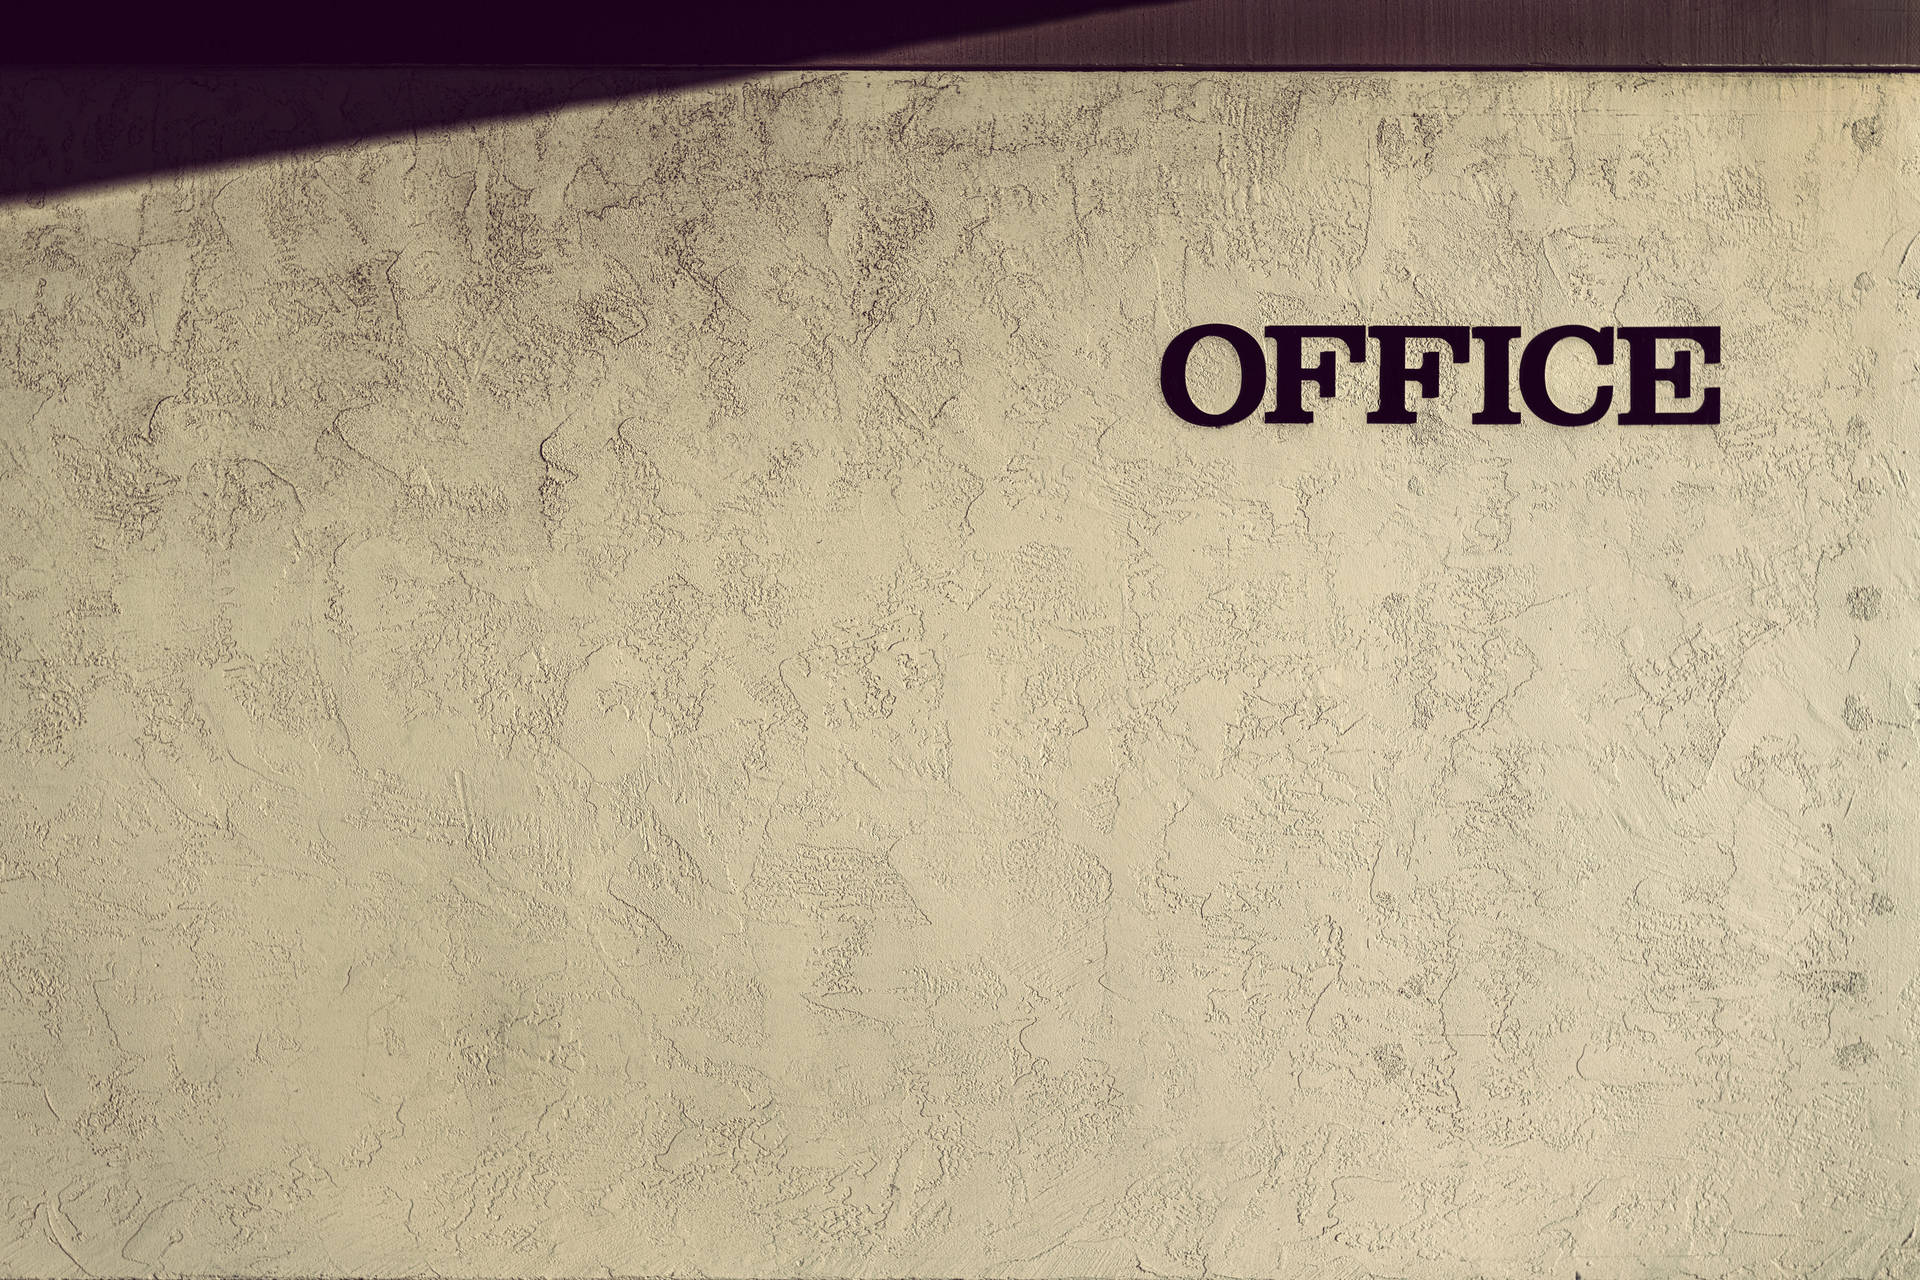 Office, Word, Inscription, Wall, Texture Background